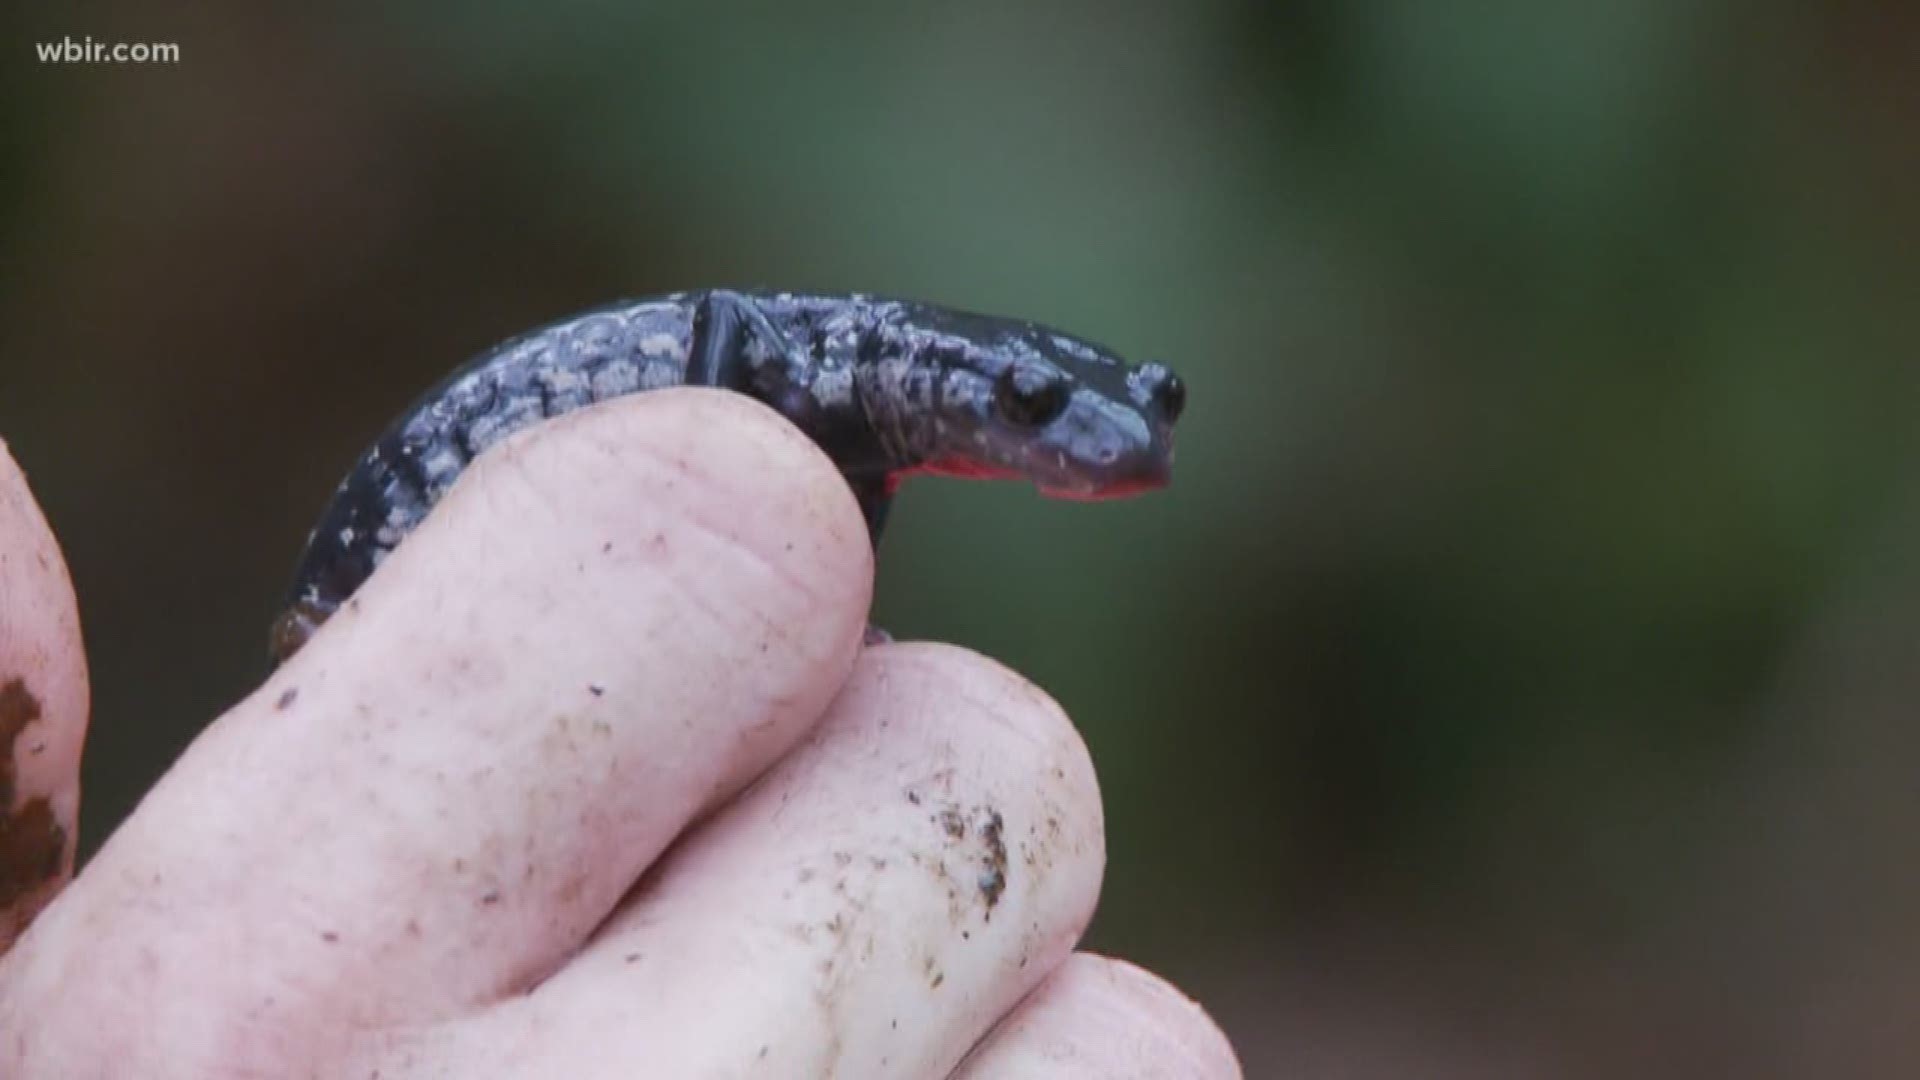 The National Park Service and volunteers are studying how salamanders, one of the park's most abundant creatures, are recovering following drought and wildfires in 2016. June 18, 2018.